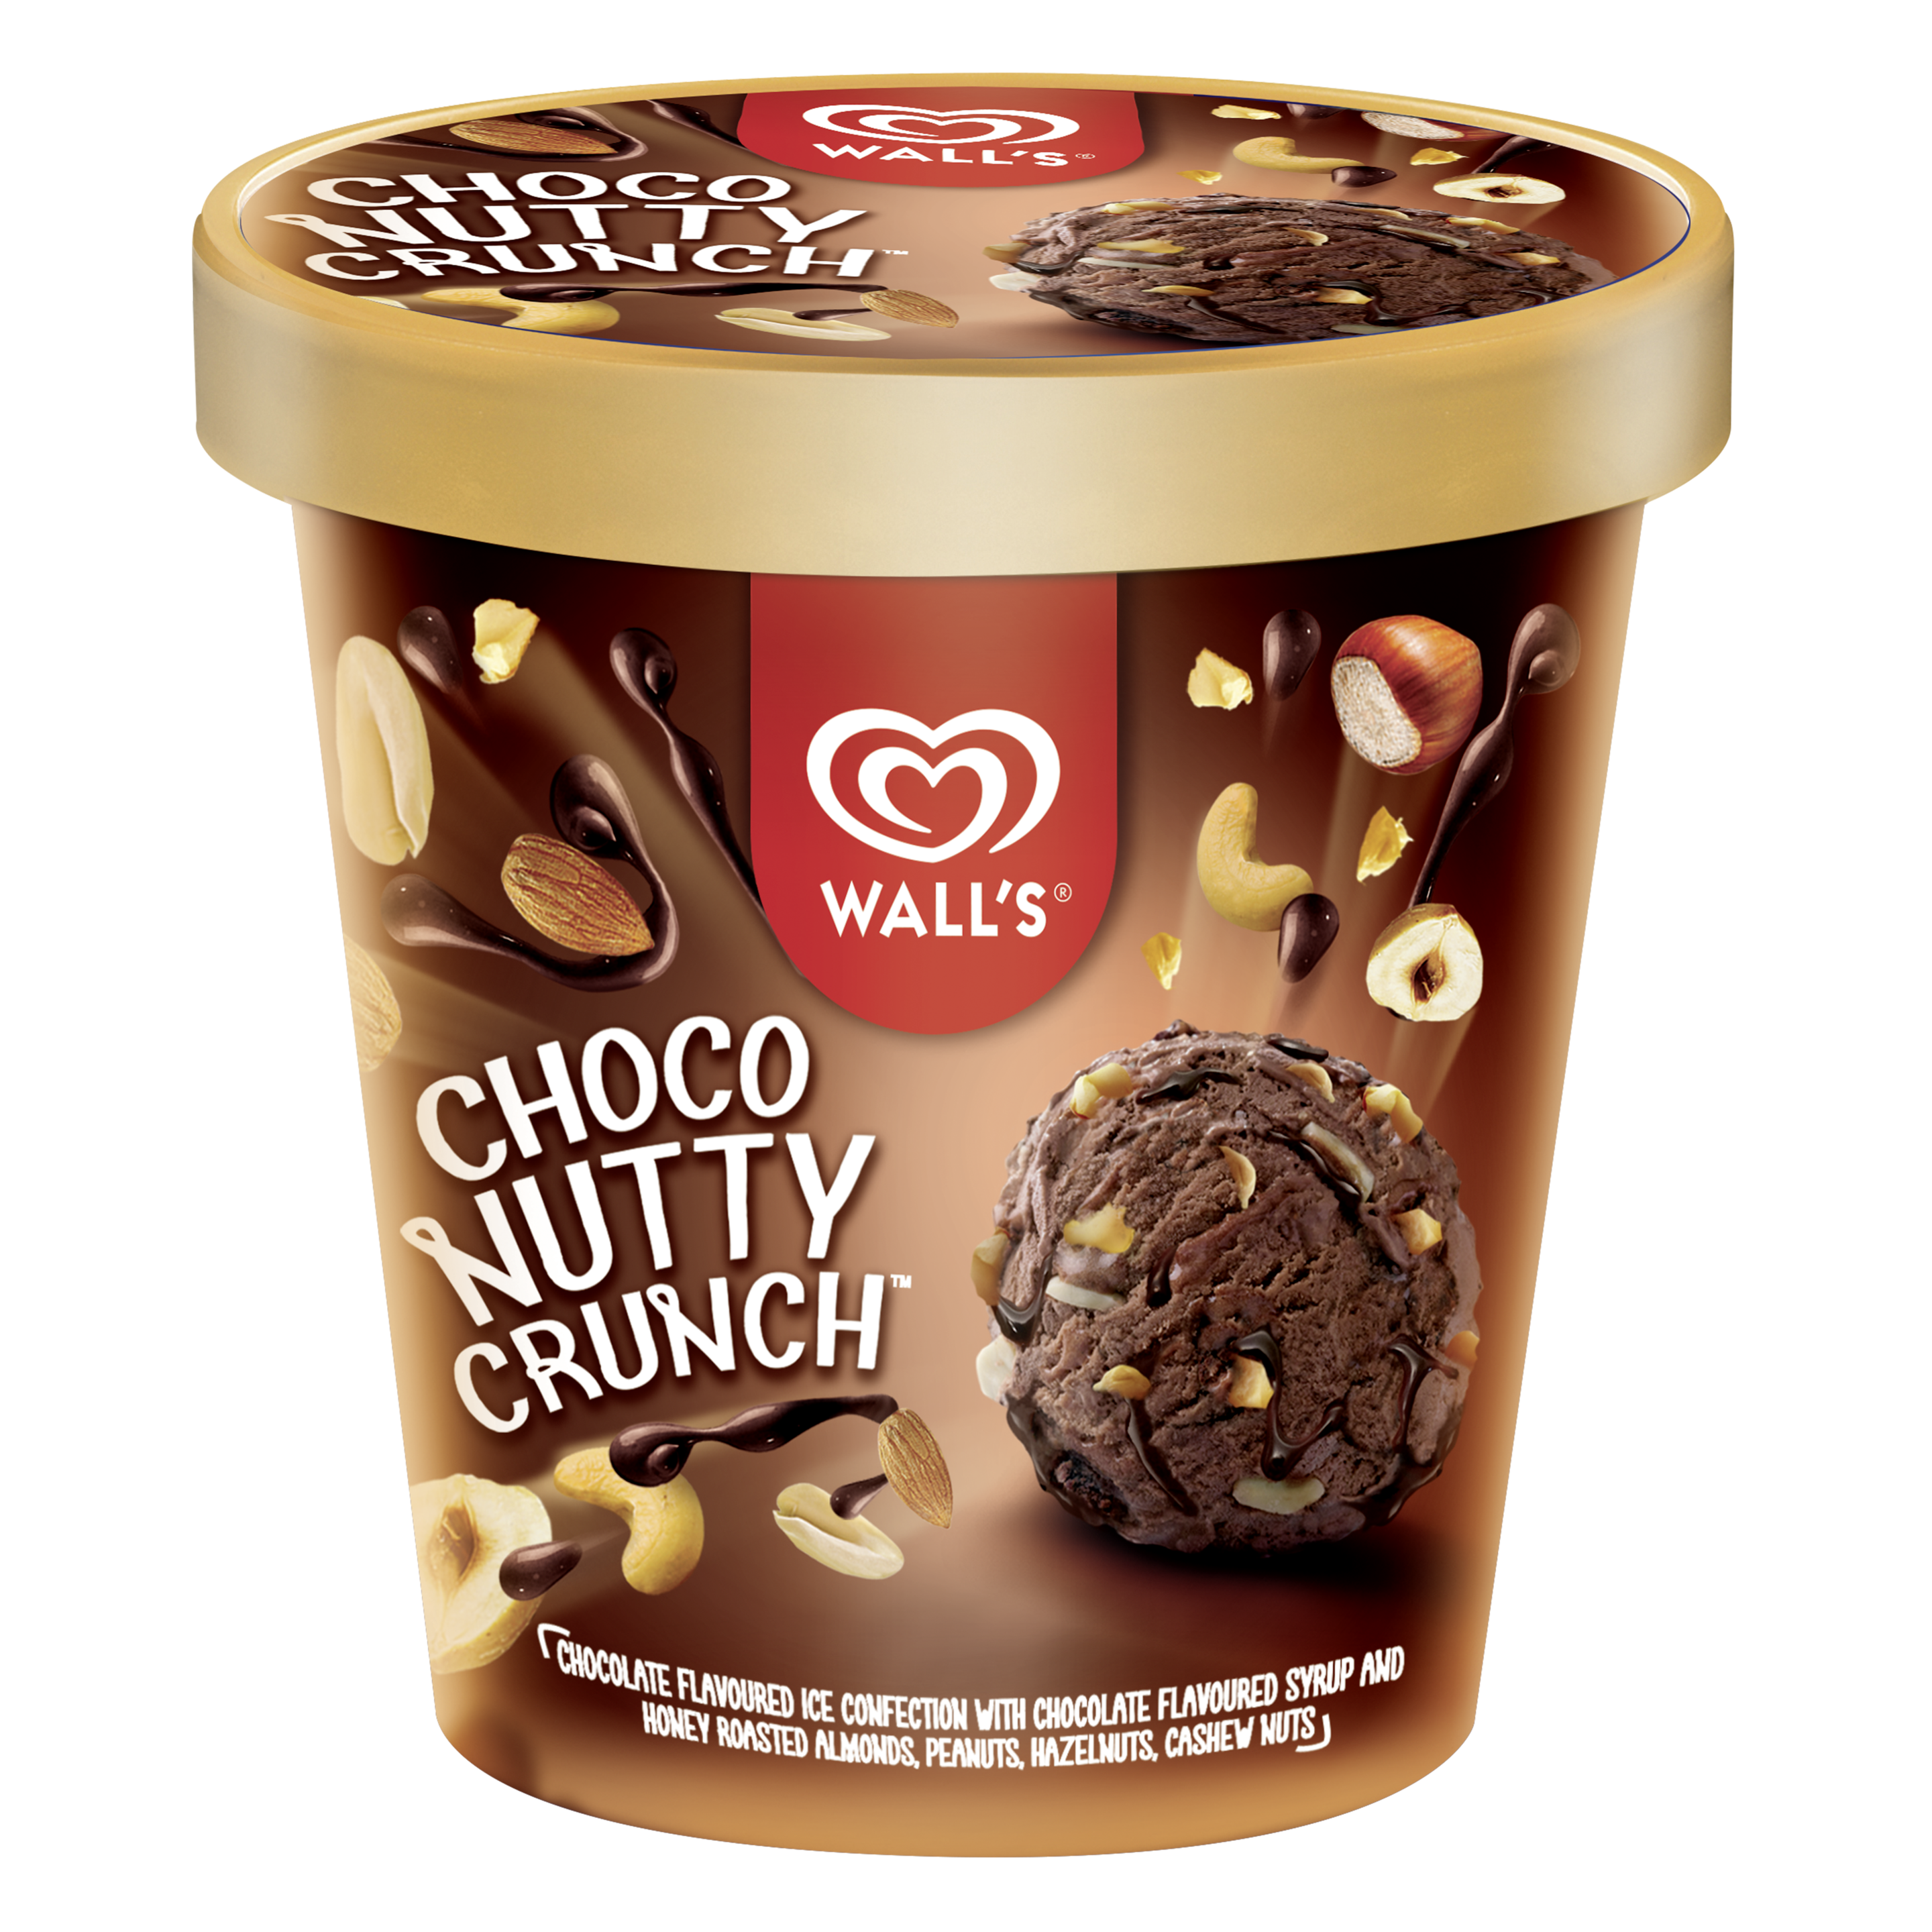 Wall's Selection Choco Nutty Crunch